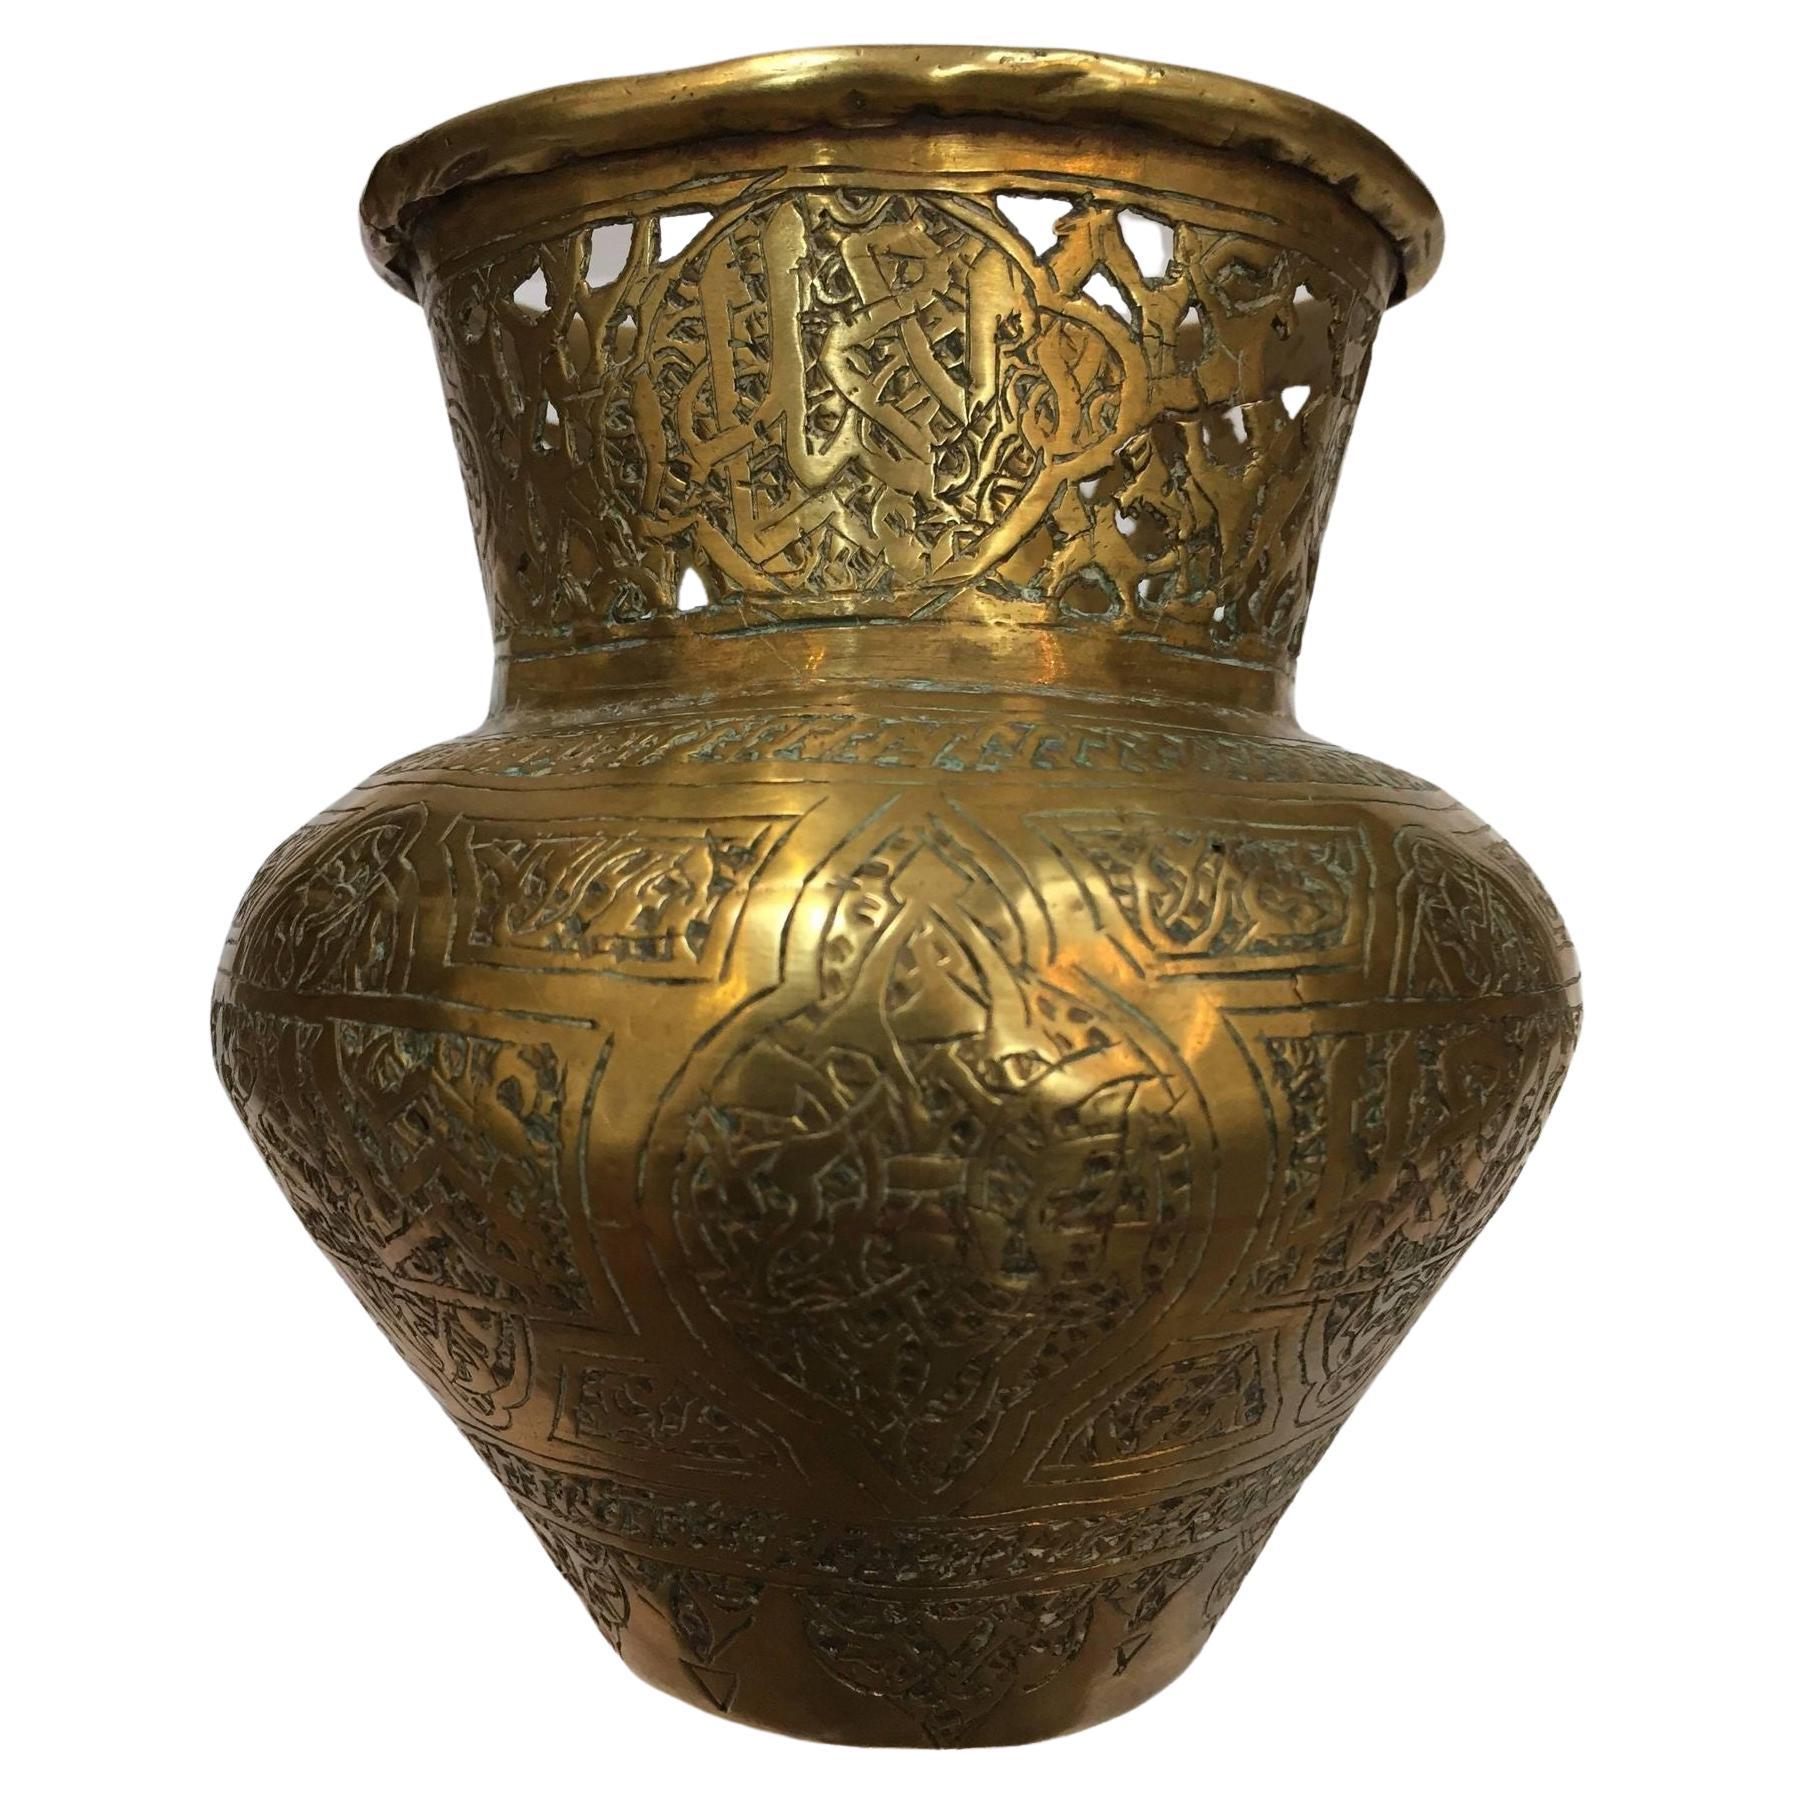 19th Century Middle Eastern Moorish brass repousse bowl, finely hand-etched, engraved, hammered and chased with elaborate Moorish Syrian designs decorated with medallions of Arabic calligraphy inscriptions.Very fine engraved and hand-cut Arabic